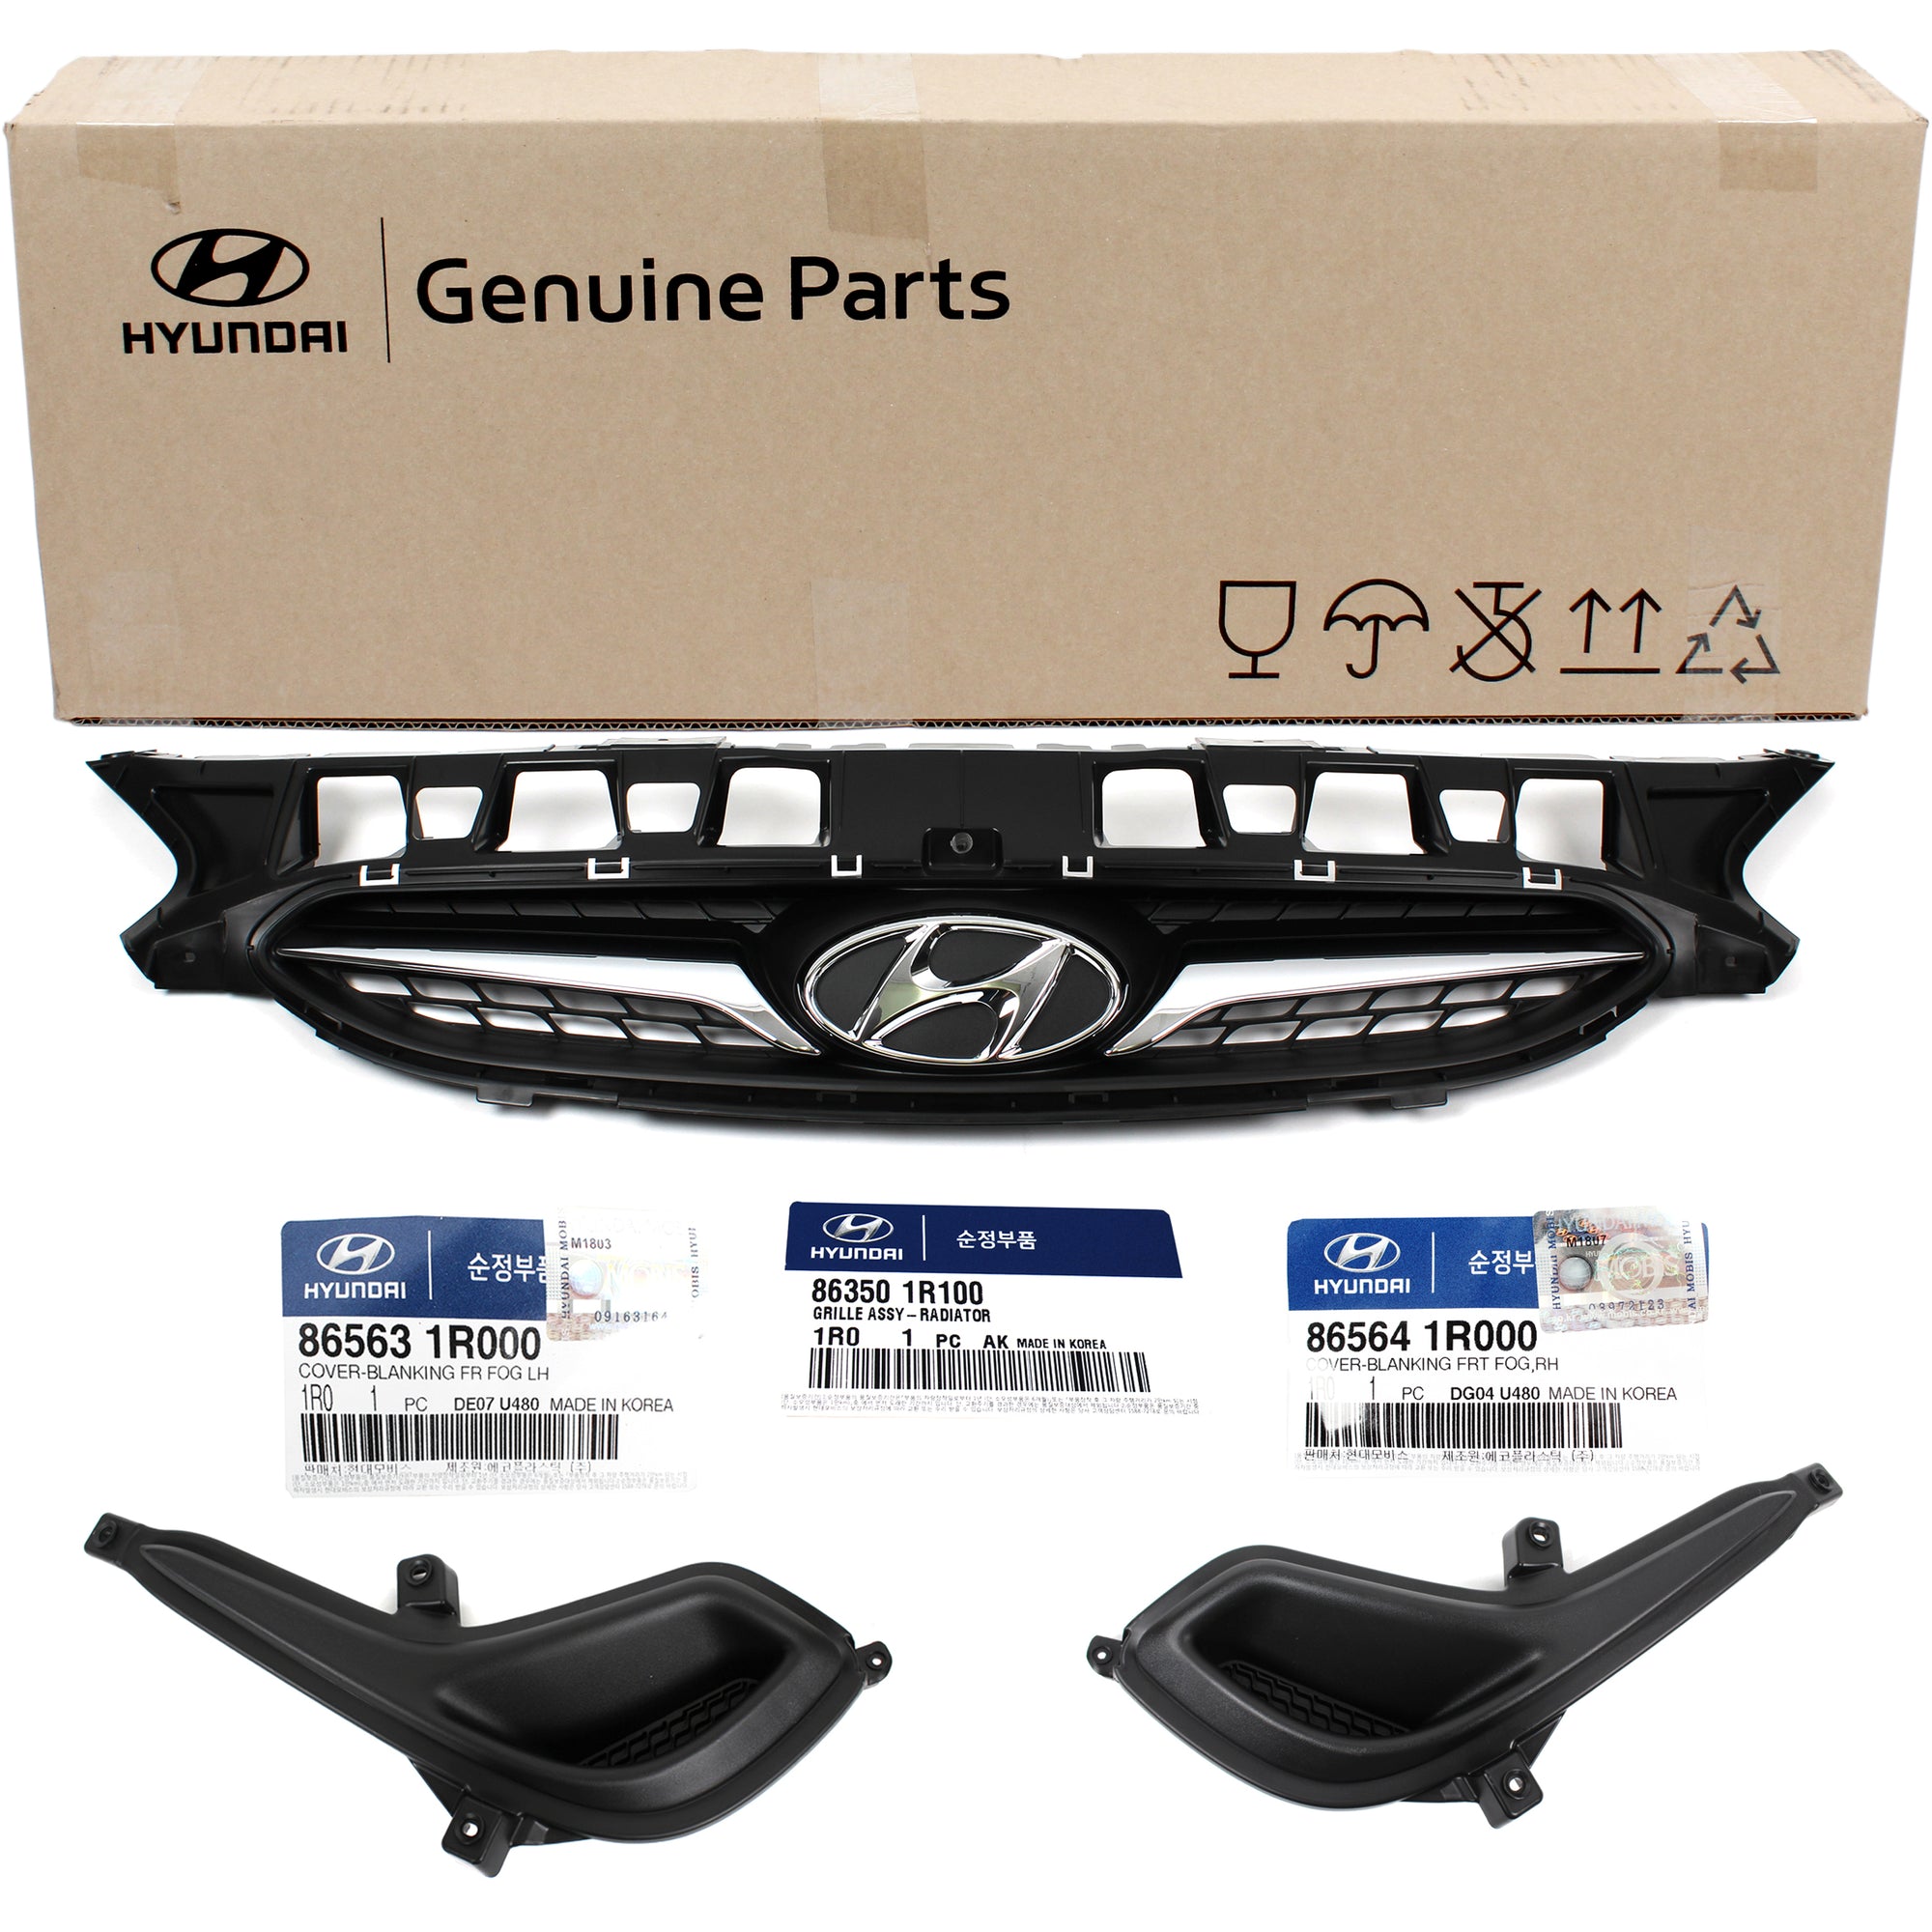 GENUINE Front Grille & Fog lamp Covers for 12-14 Hyundai Accent 863501R100